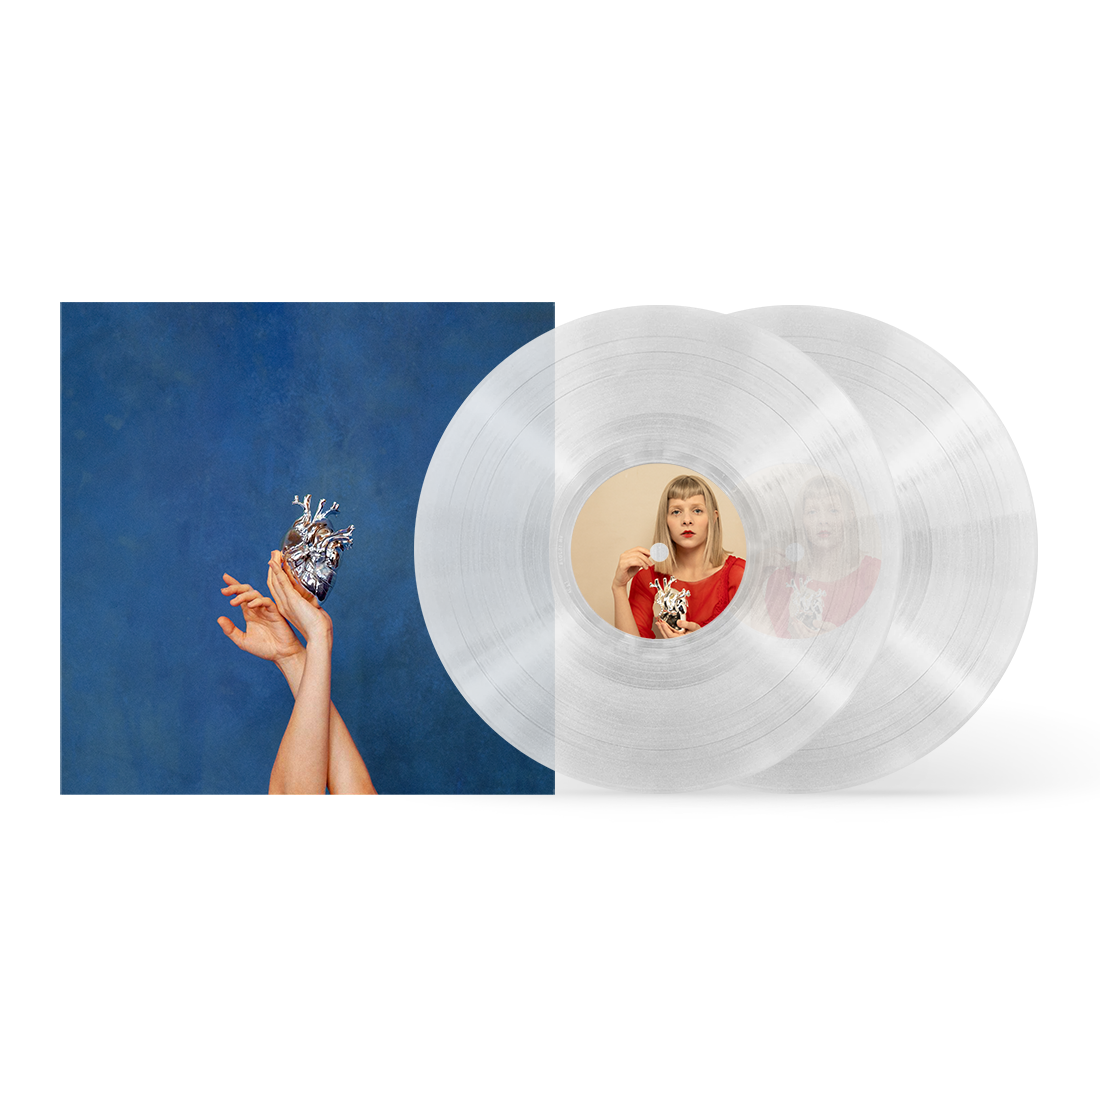 What Happened To The Heart? Limited Clear Vinyl 2LP & Signed Print